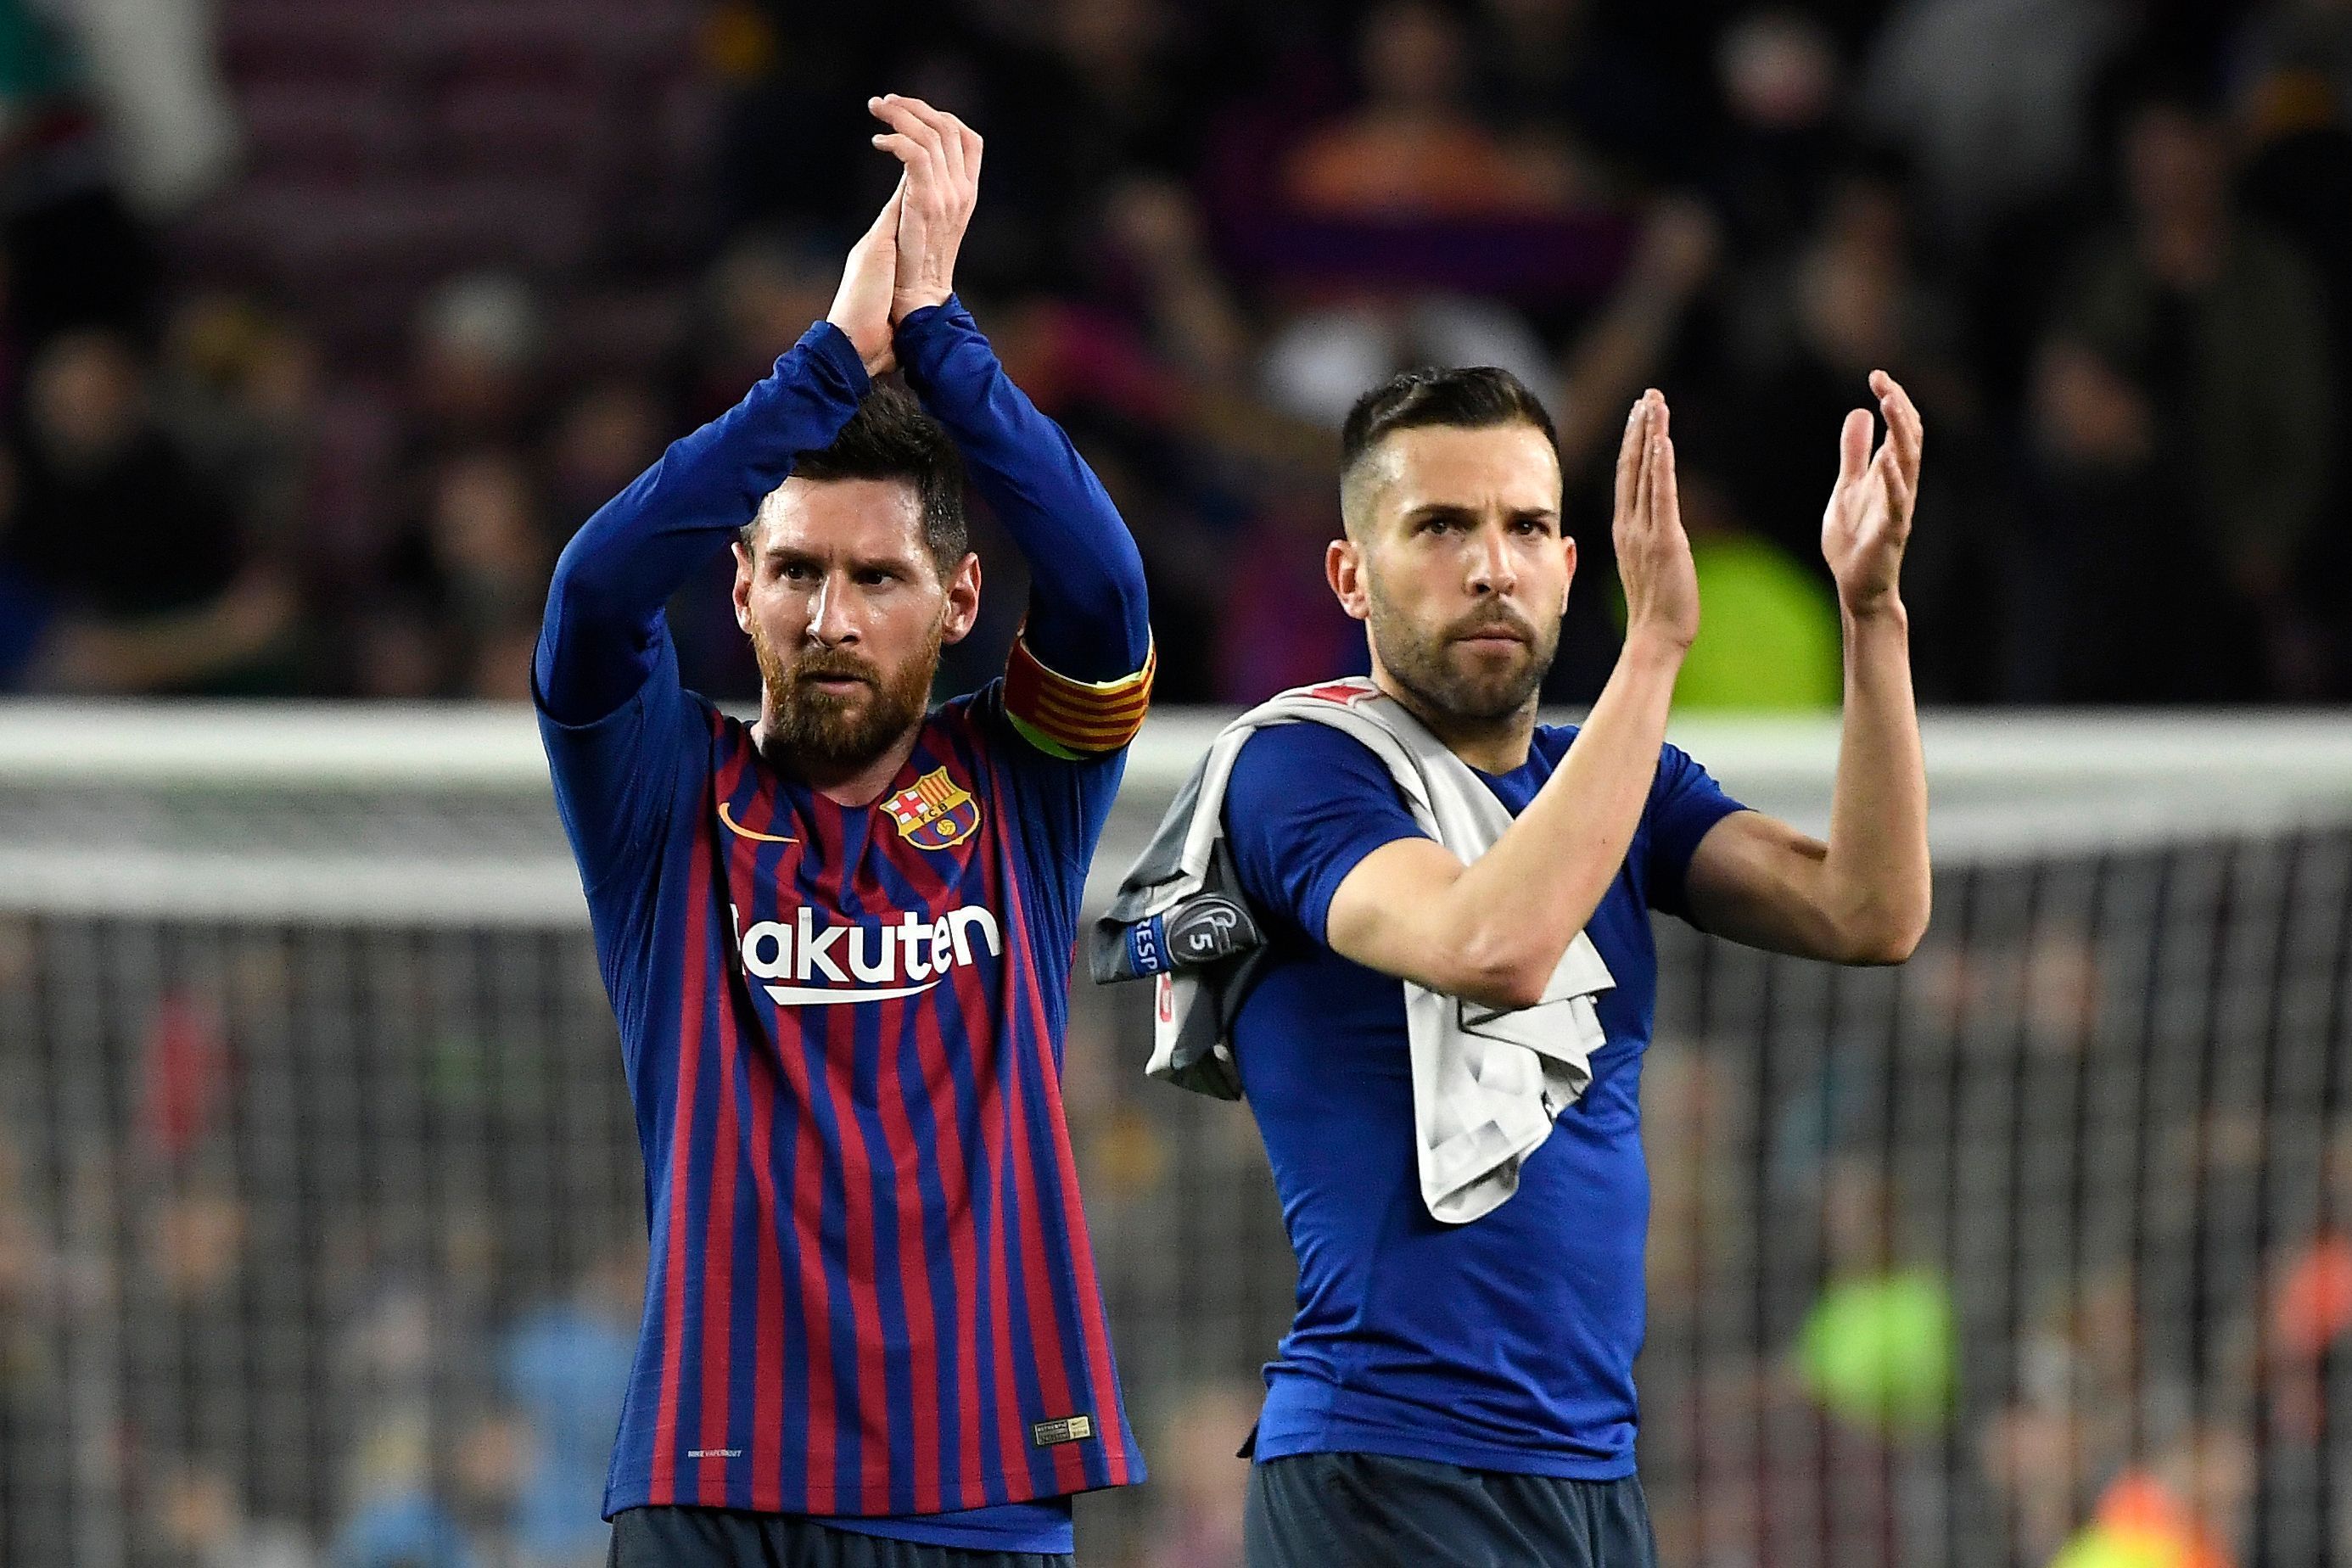 Alba: Seeing Messi with another shirt other than Barca's is always weird